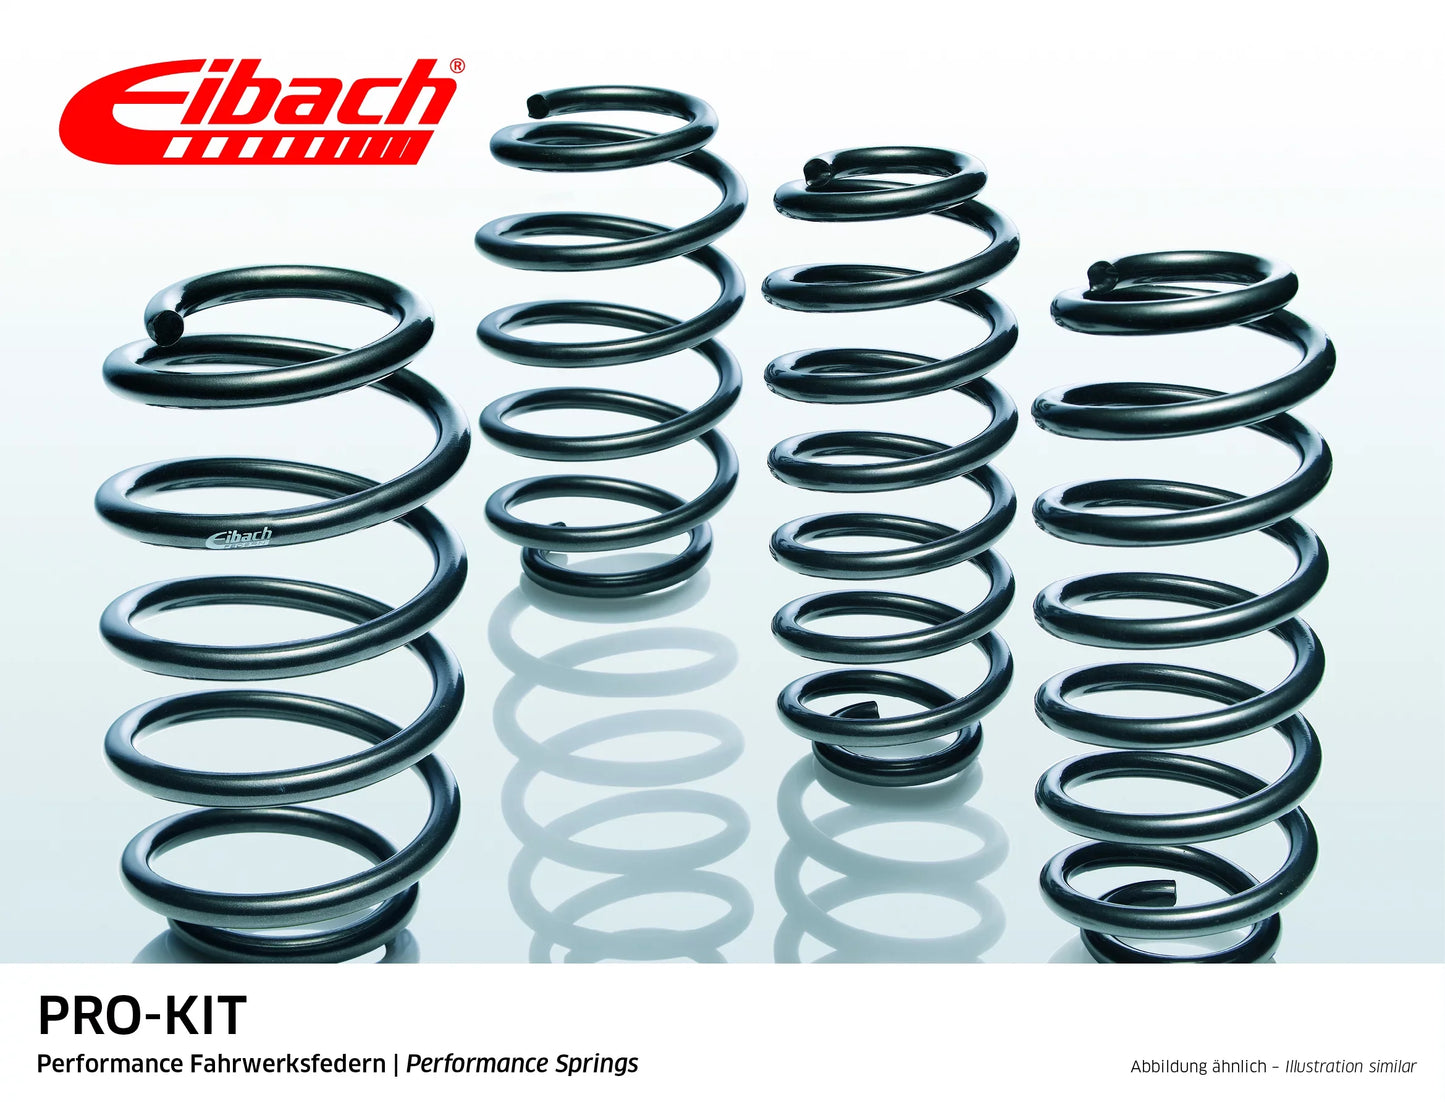 Eibach Pro-Kit Lowering Springs (E10-55-004-11-22) at £254.35